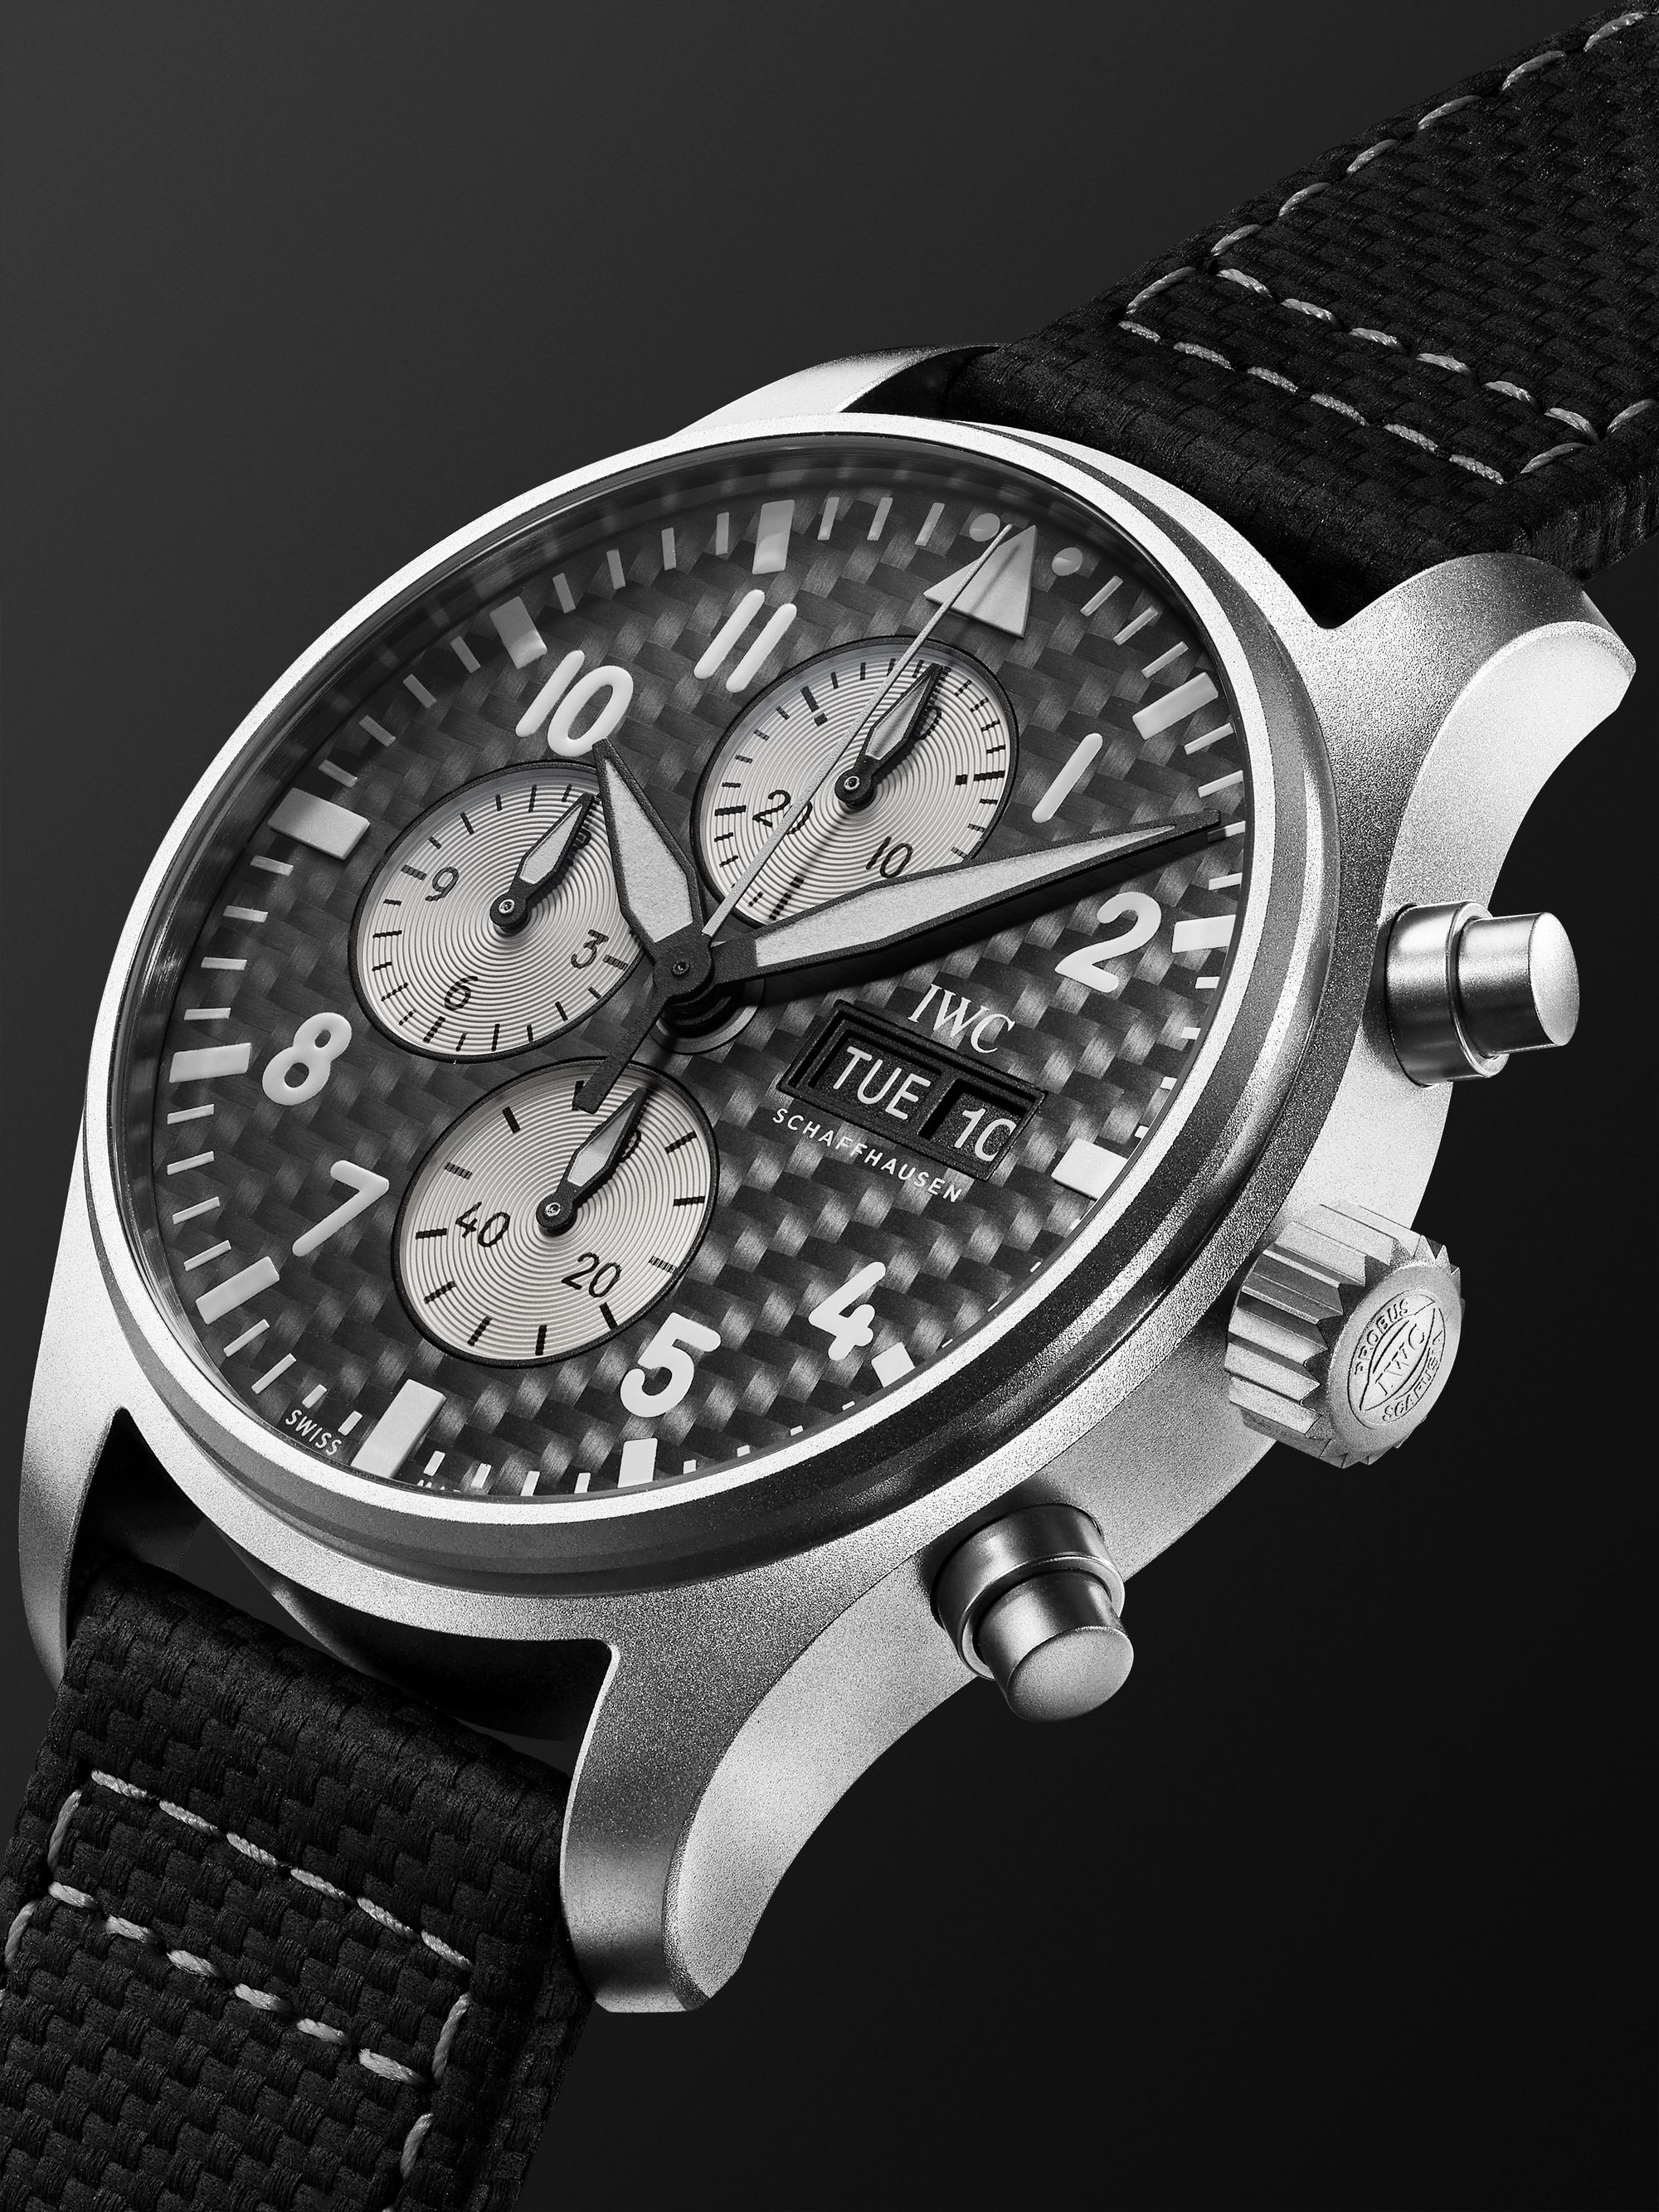 IWC SCHAFFHAUSEN Pilot's Limited Edition AMG Automatic Chronograph 43mm Titanium and Leather Watch, Ref. No. IW377903